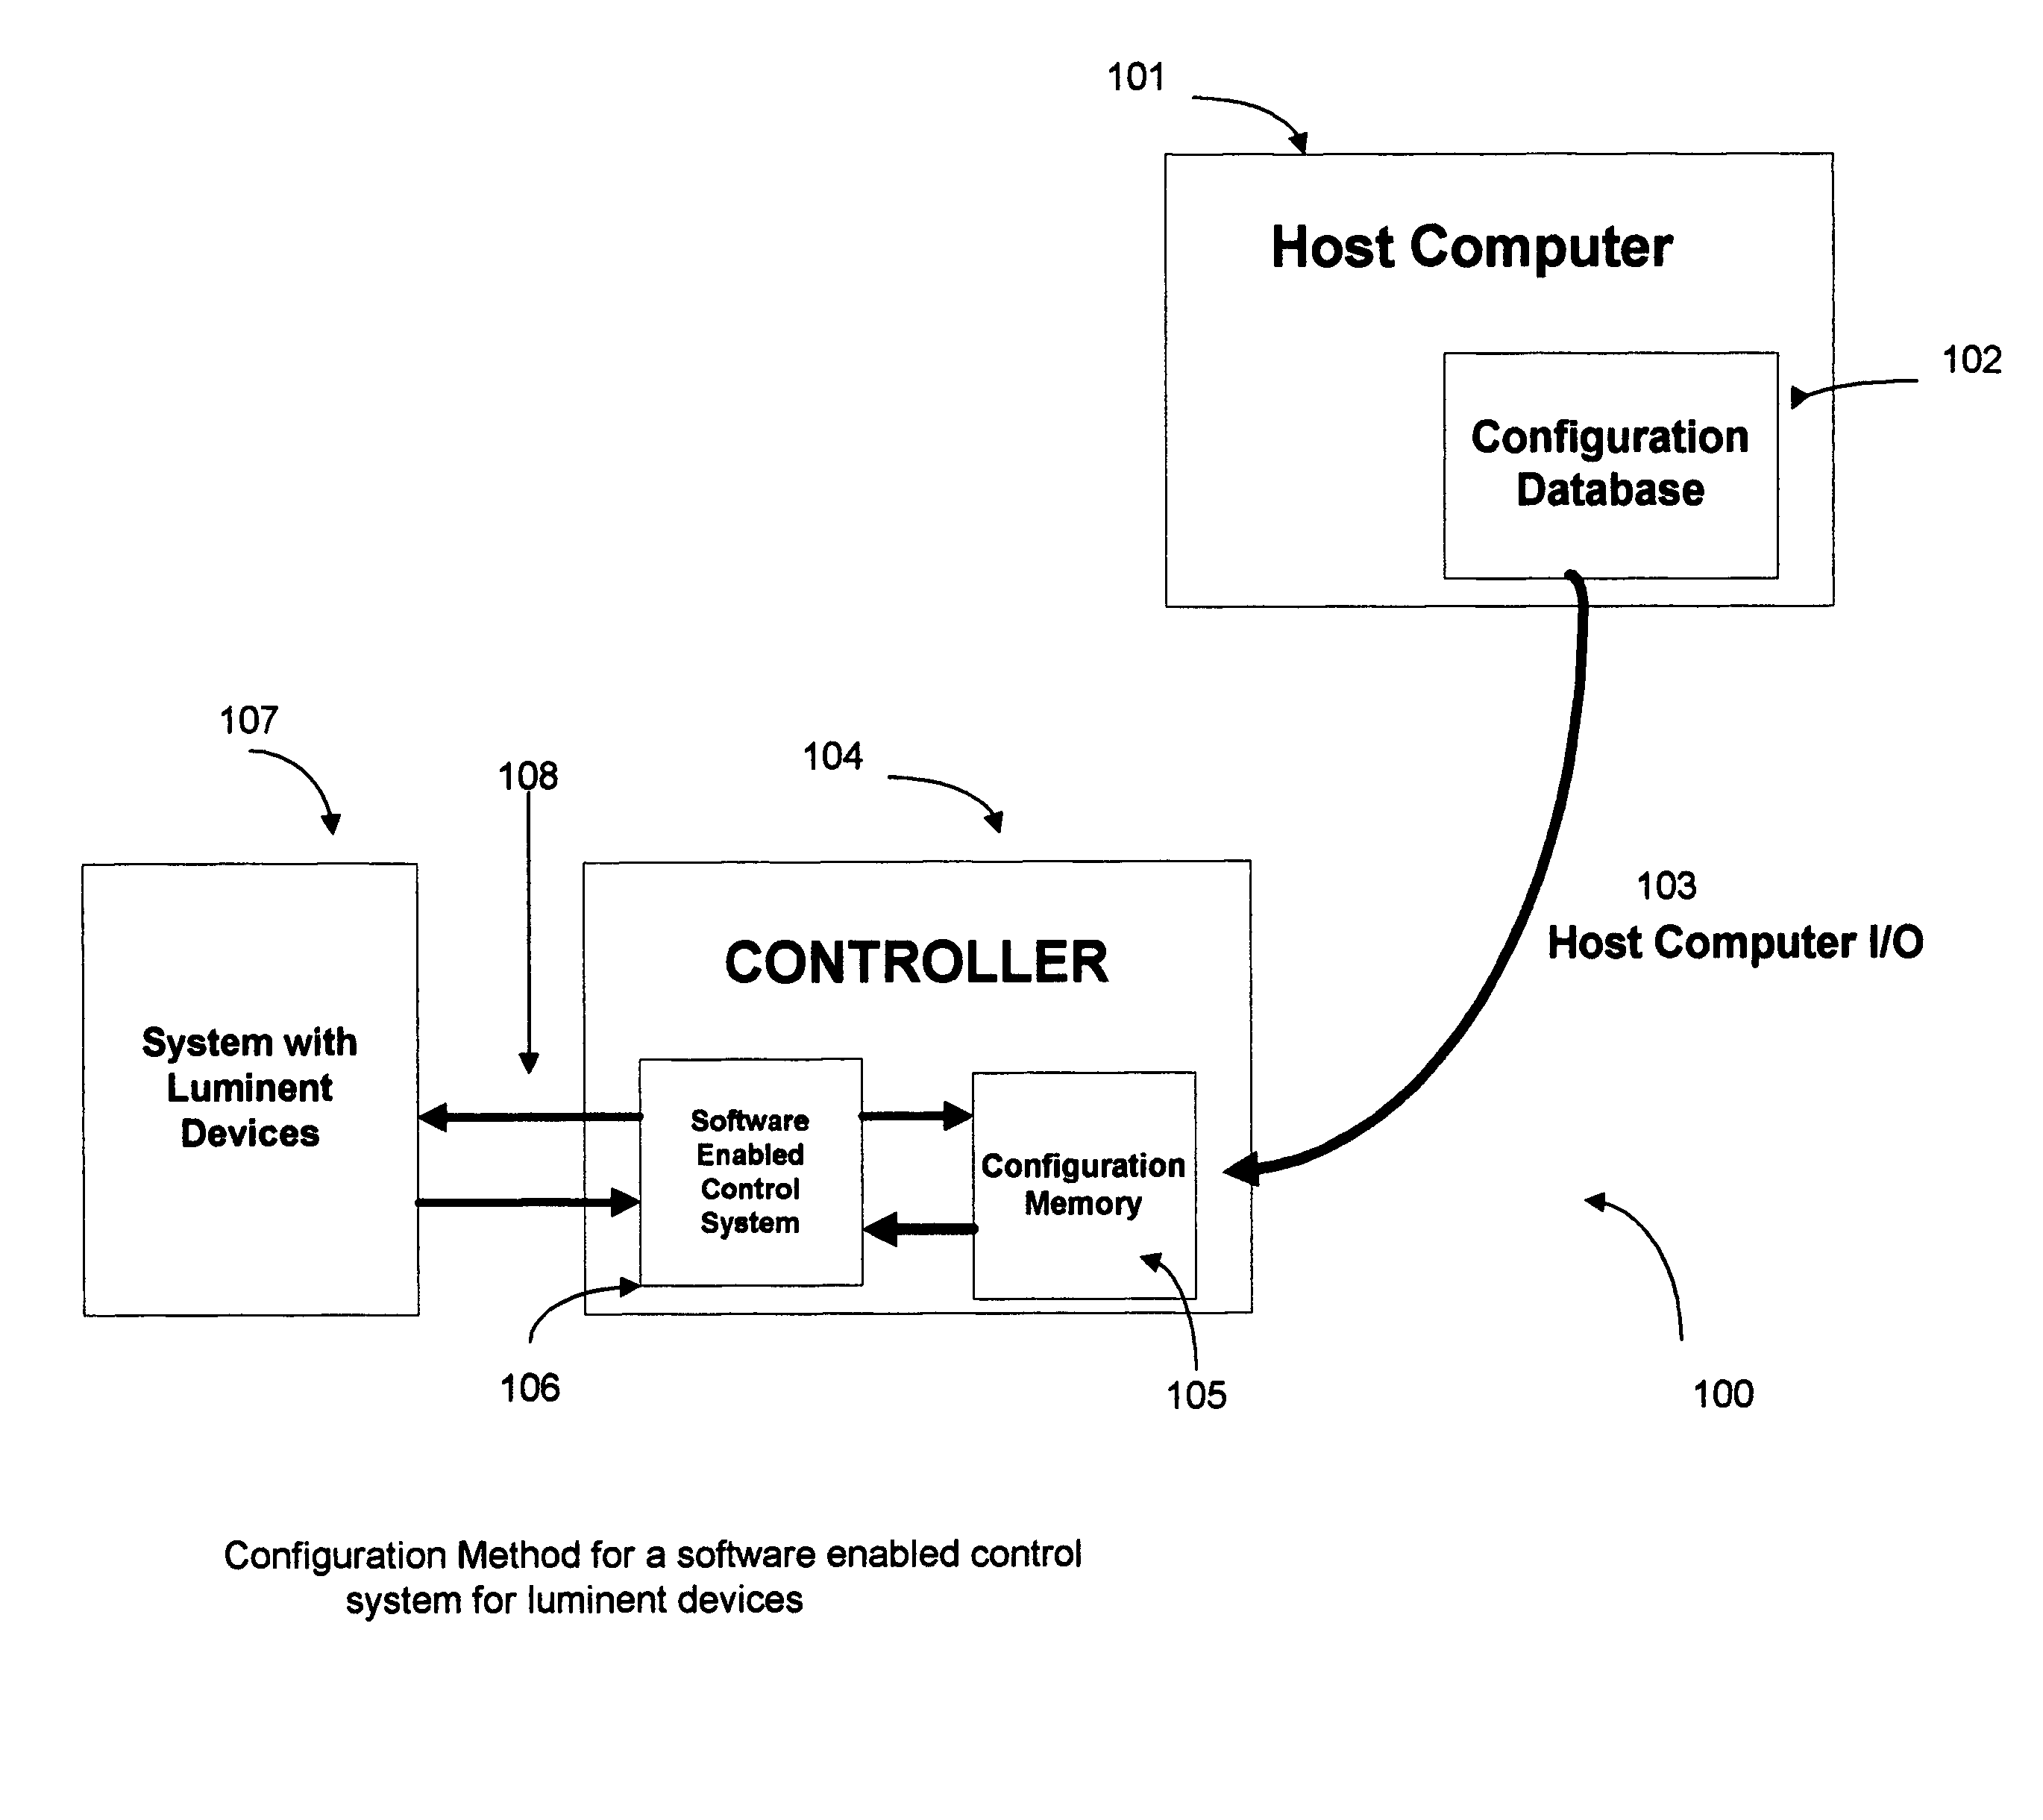 Software enabled control for systems with luminent devices